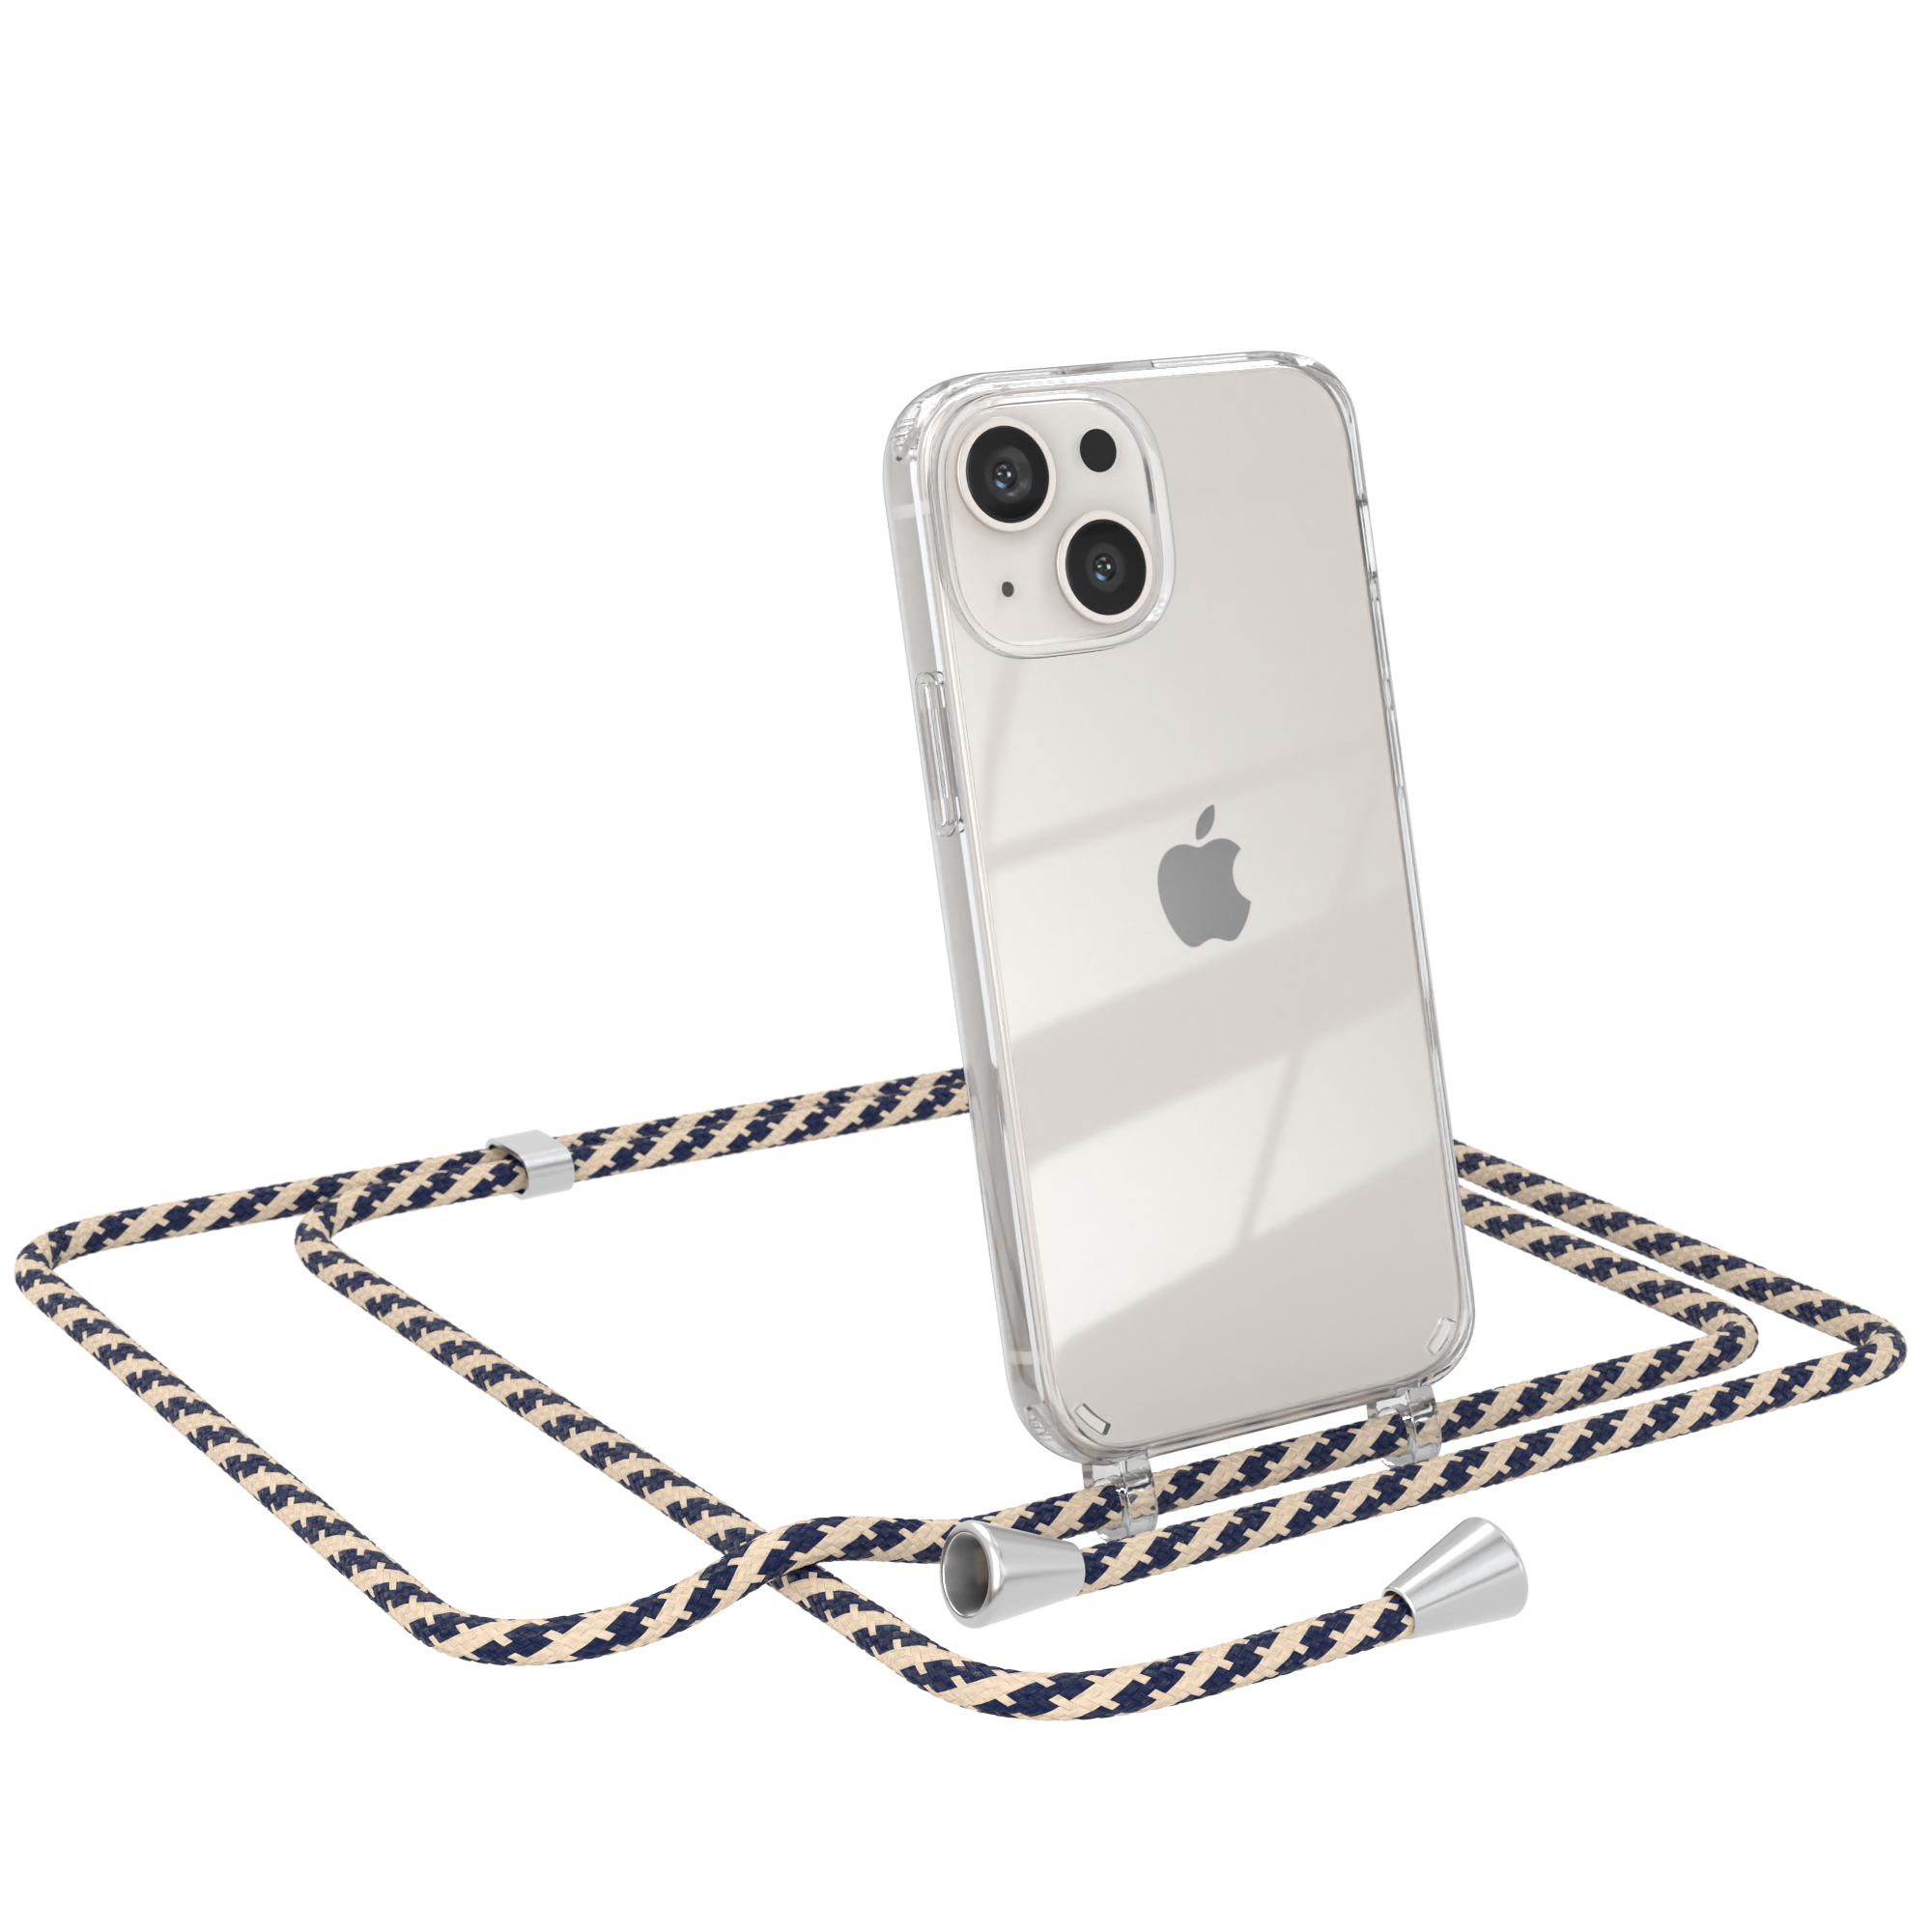 Apple, Clear Cover Umhängeband, Umhängetasche, Taupe EAZY mit iPhone 13 Camouflage CASE Mini,